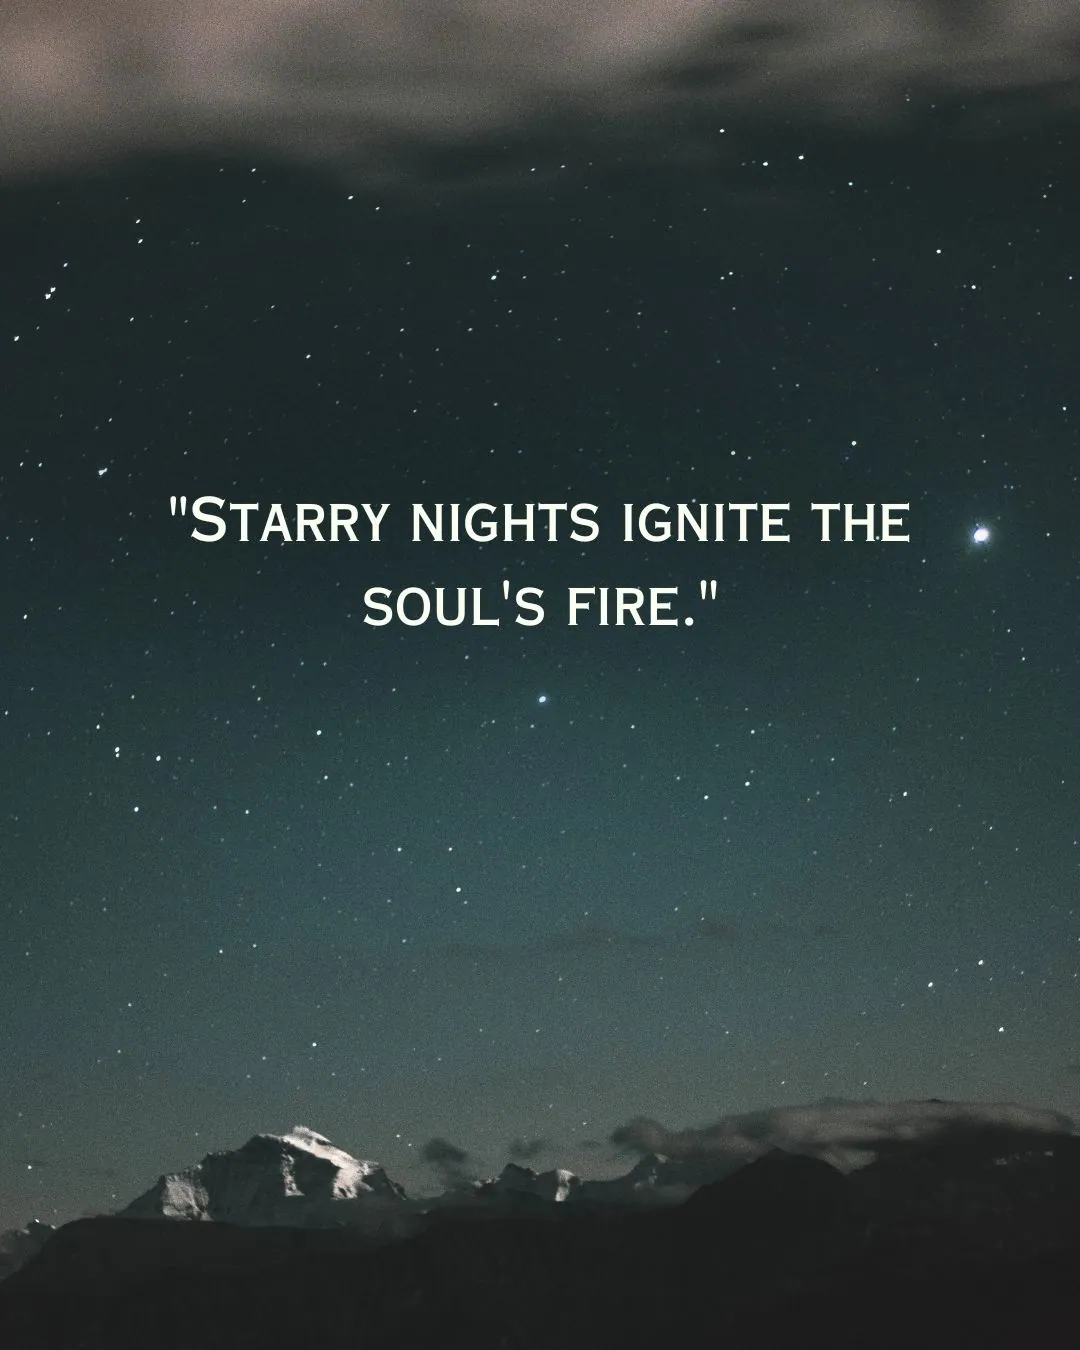 Short Night Sky Quotes for Instagram Image 4